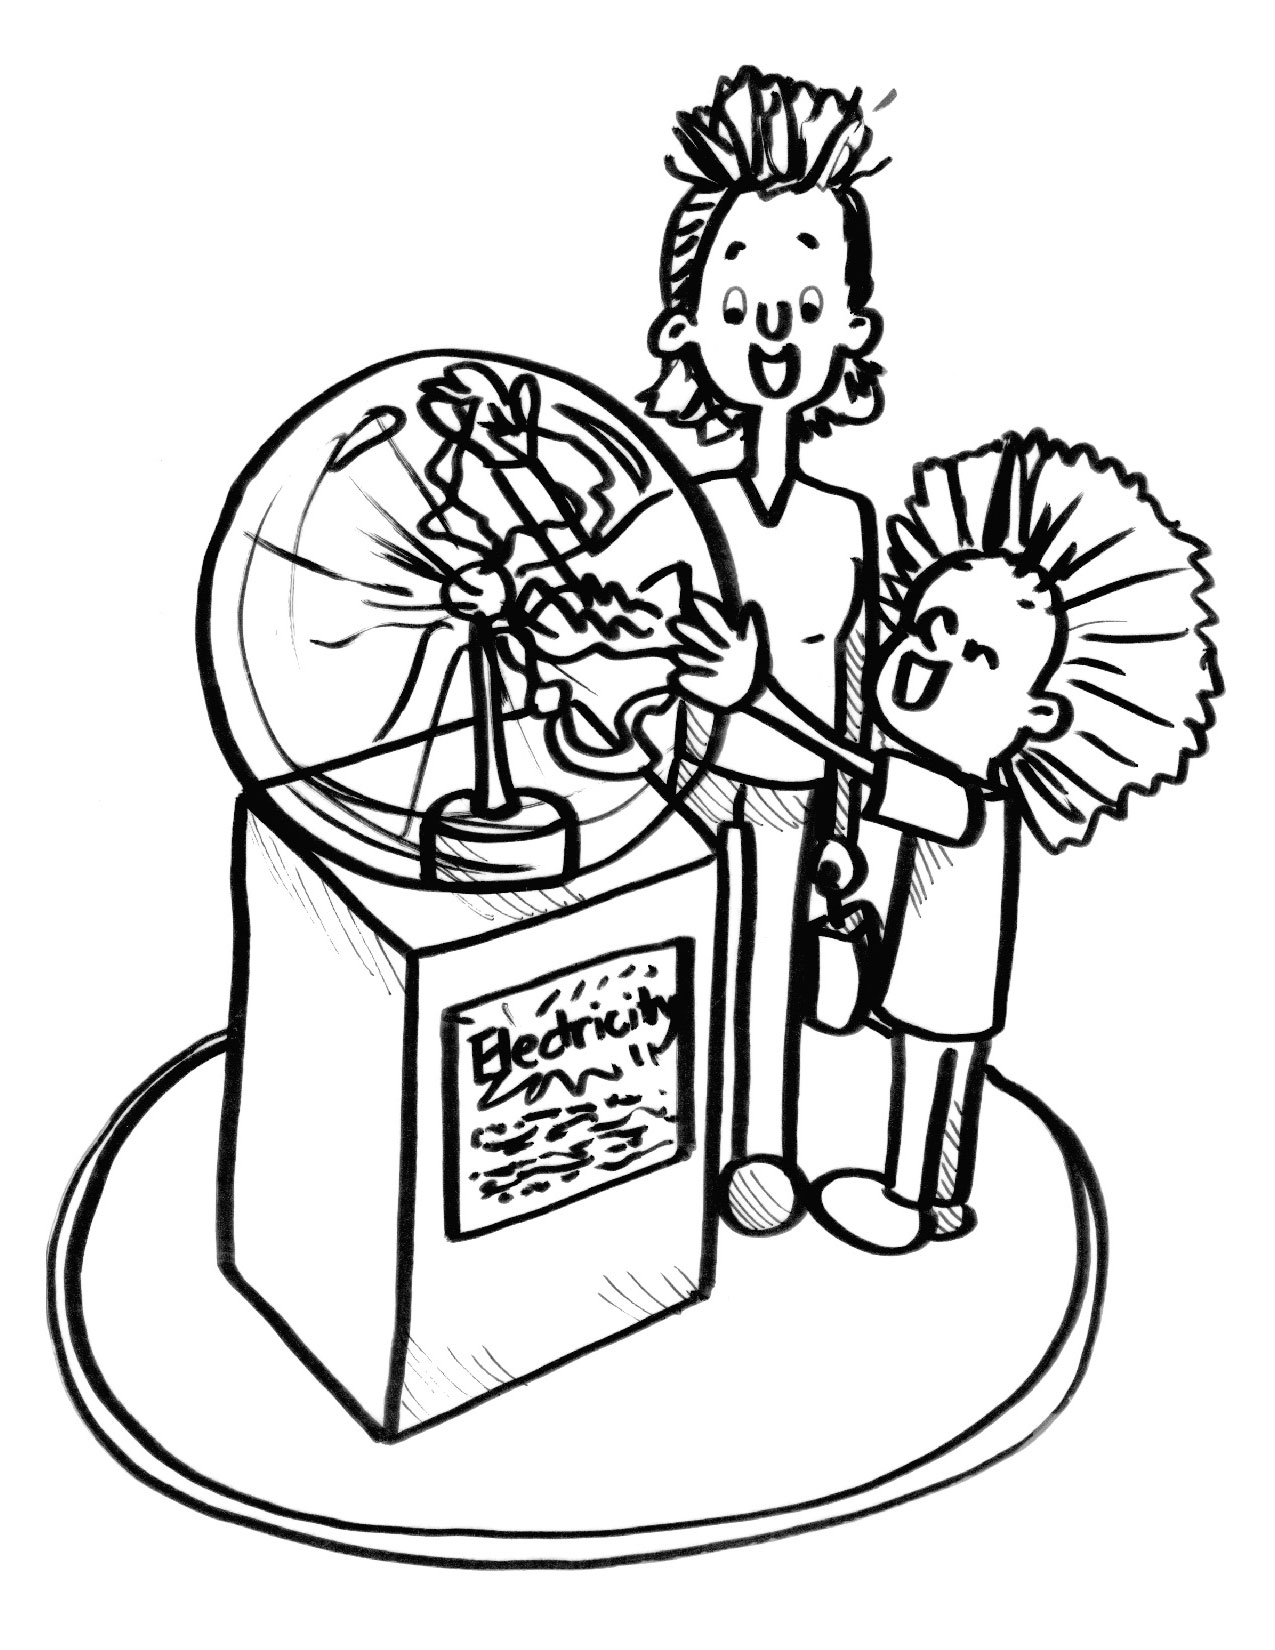 Coloring sheet of a girl and her teacher observing a fan blowing